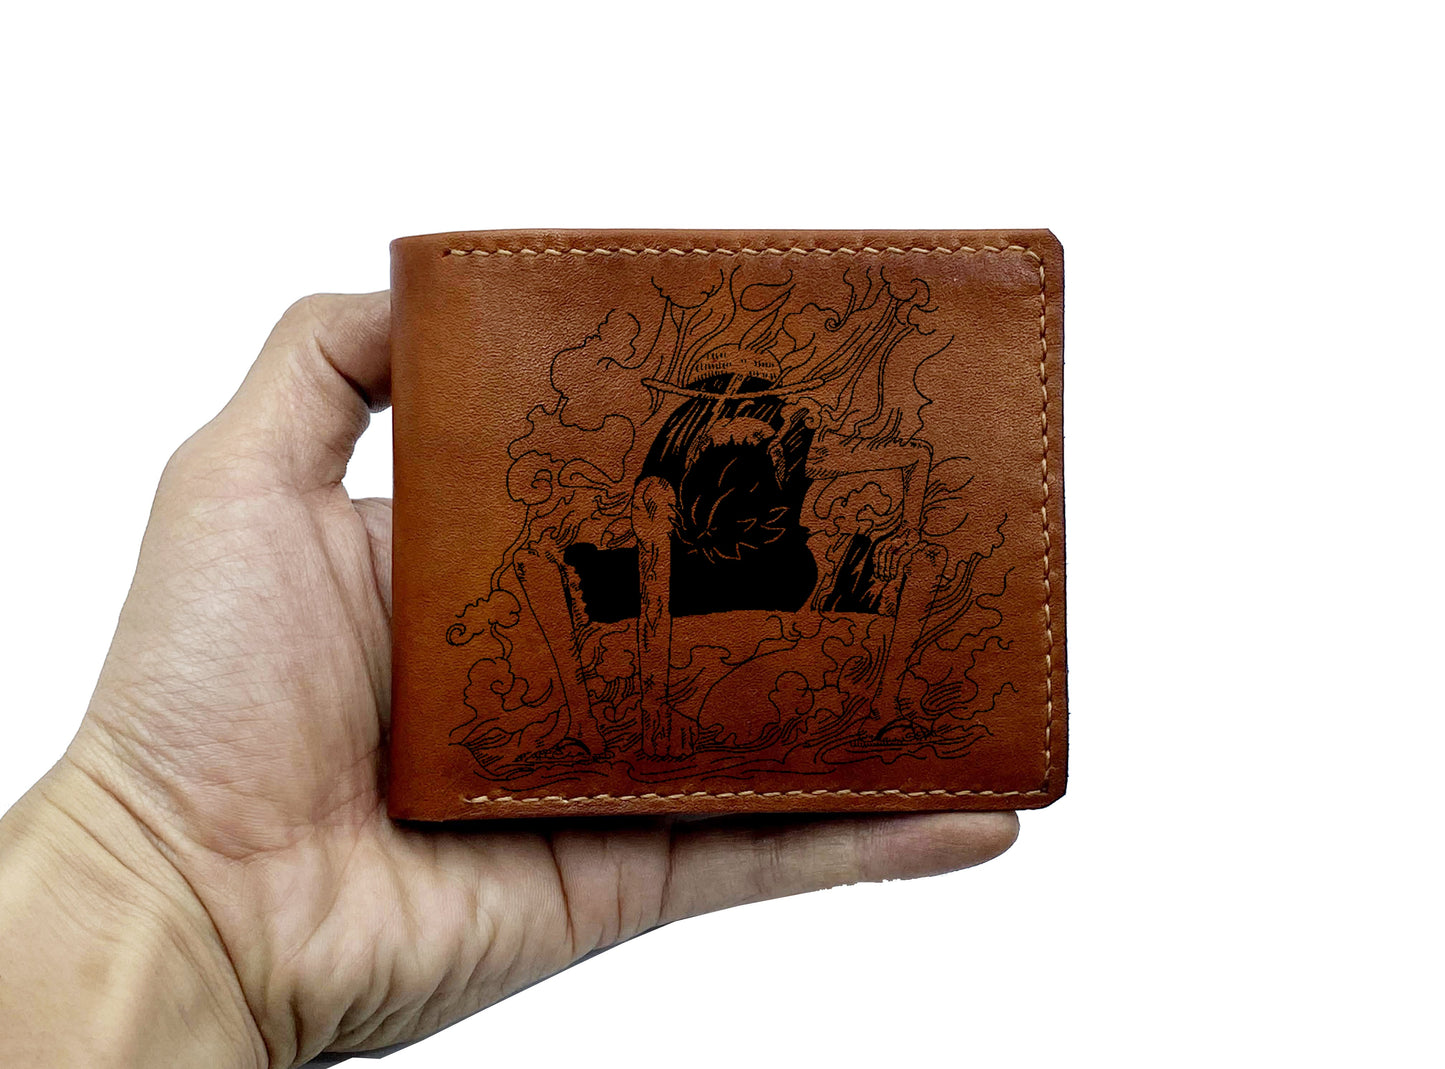 Mayan Corner - Whitebeard pirate leather wallet, bifold men's wallet, custom One piece leather gift for fan collection, leather anniversary gifts